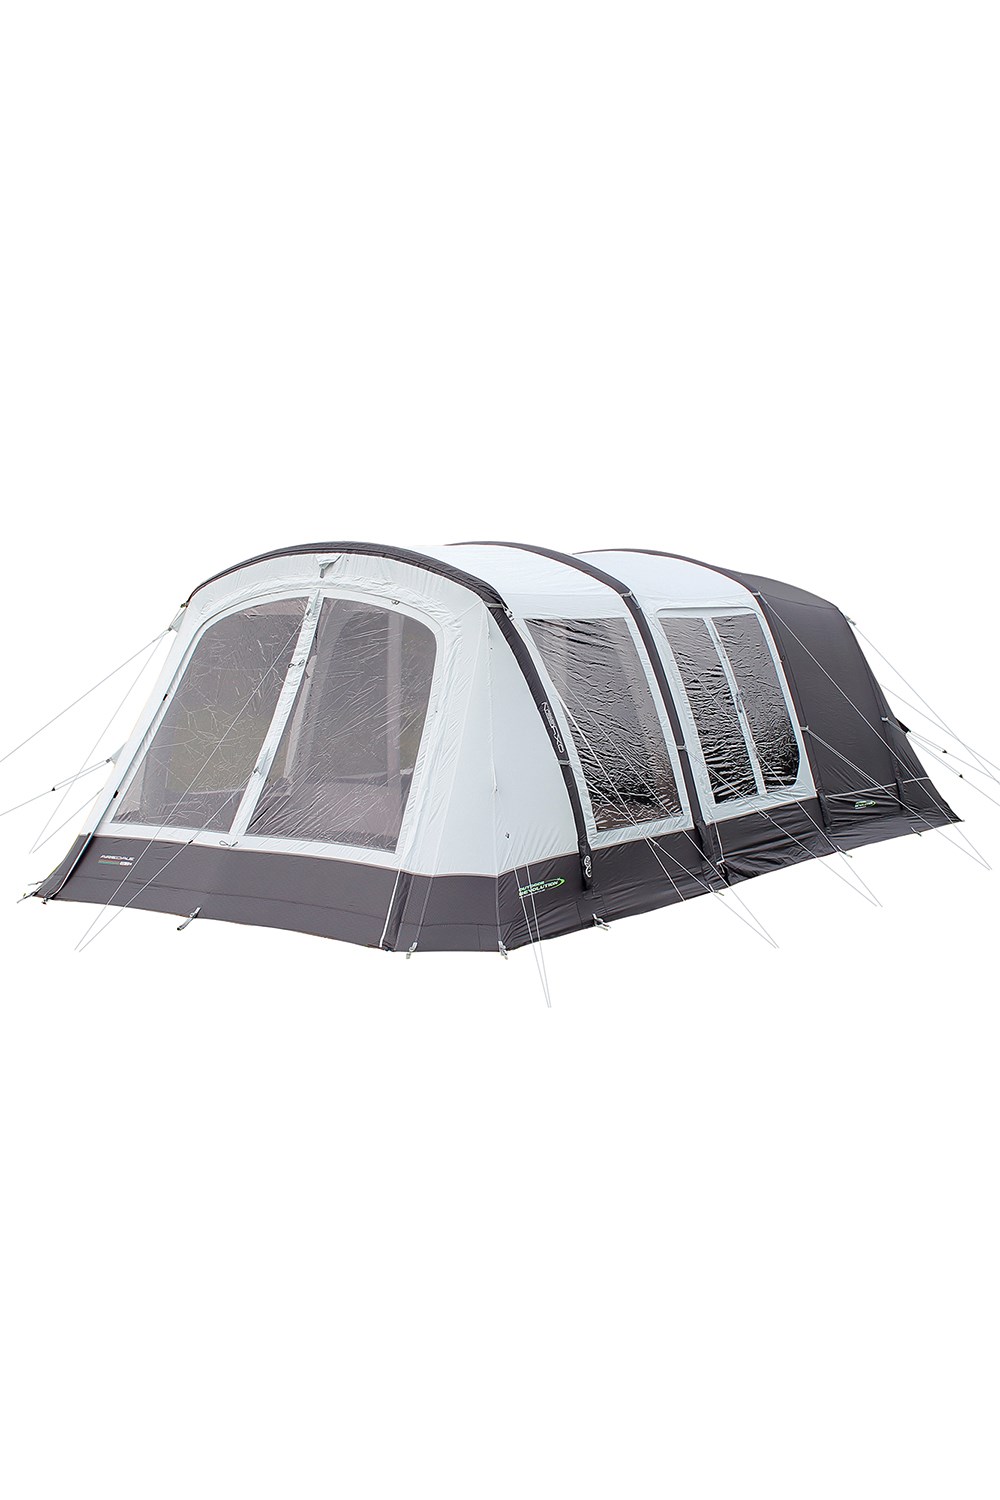 Airedale 5. 0s (2021) 5 Man Tent -